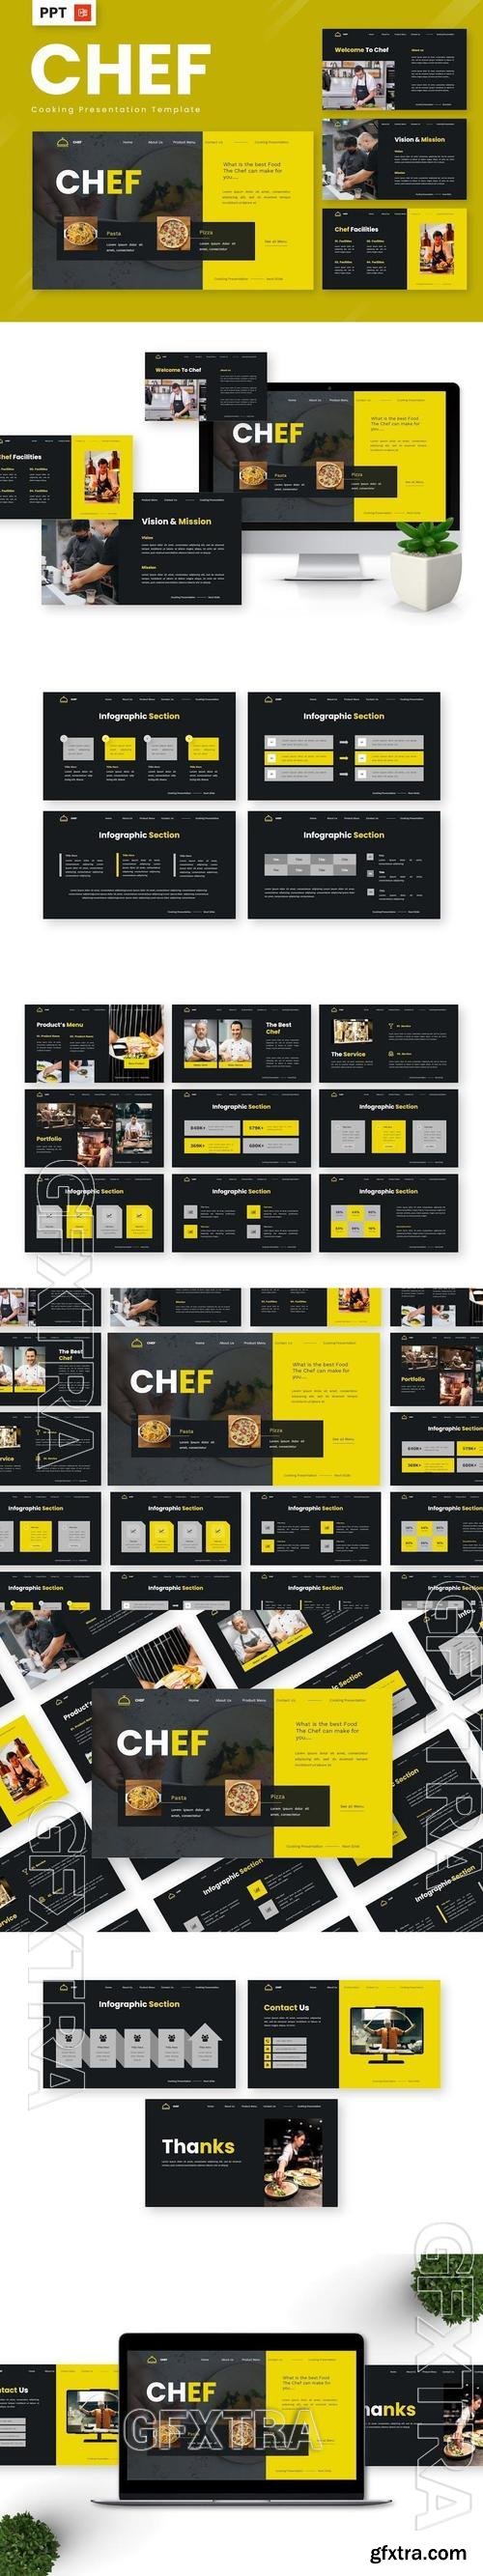 Chef - Cooking Powerpoint Templates 9SB7LH7